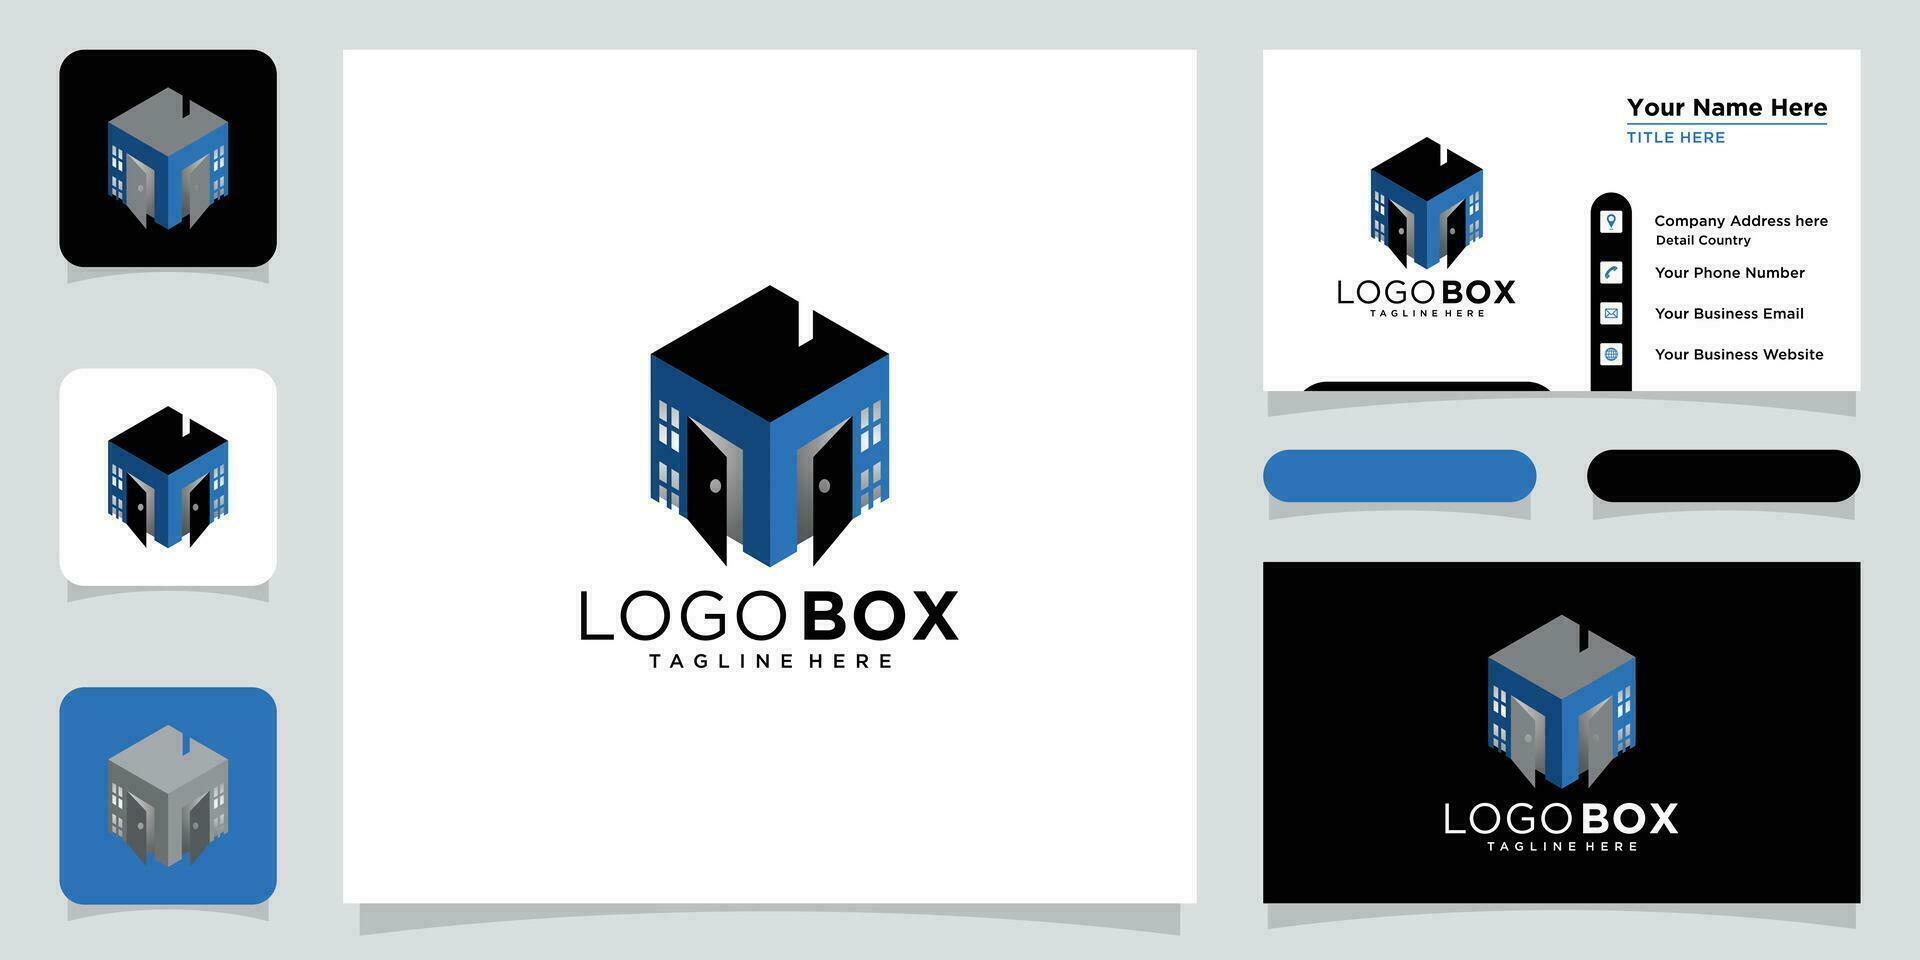 Box house logo template design with business card design Premium Vector